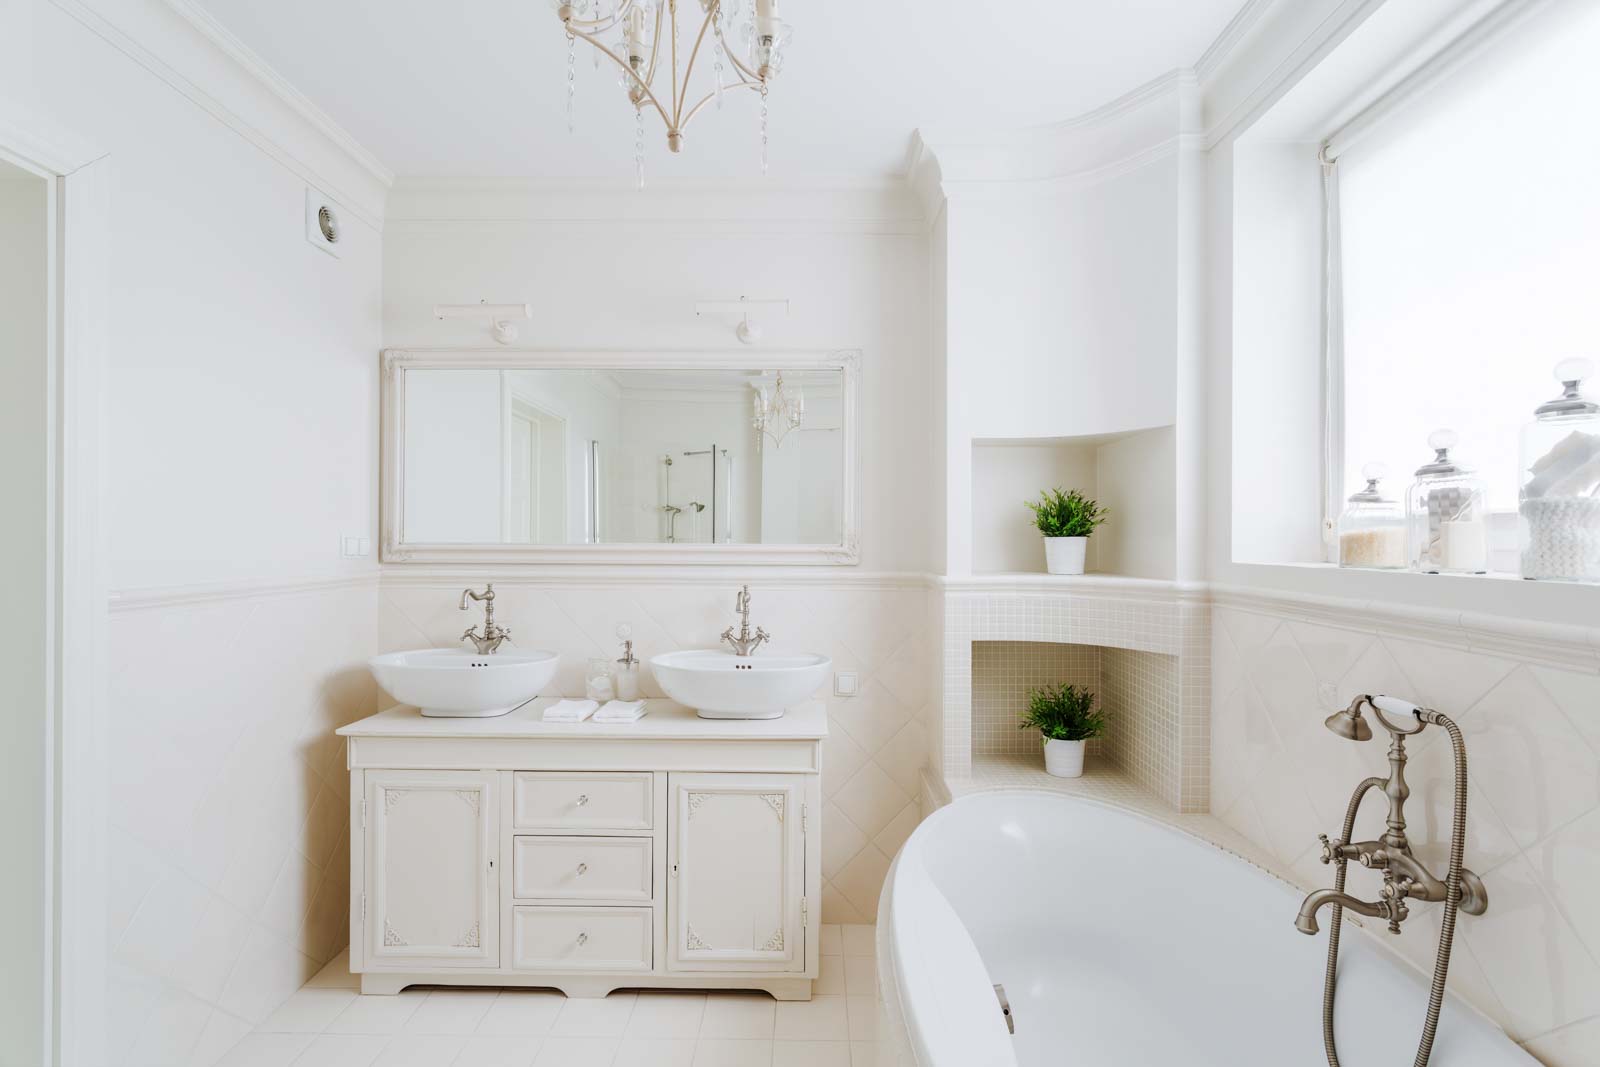 Bathroom Remodeling Ideas and Inspiration + Tips to read before you start your next home remodel project via frostedmoms